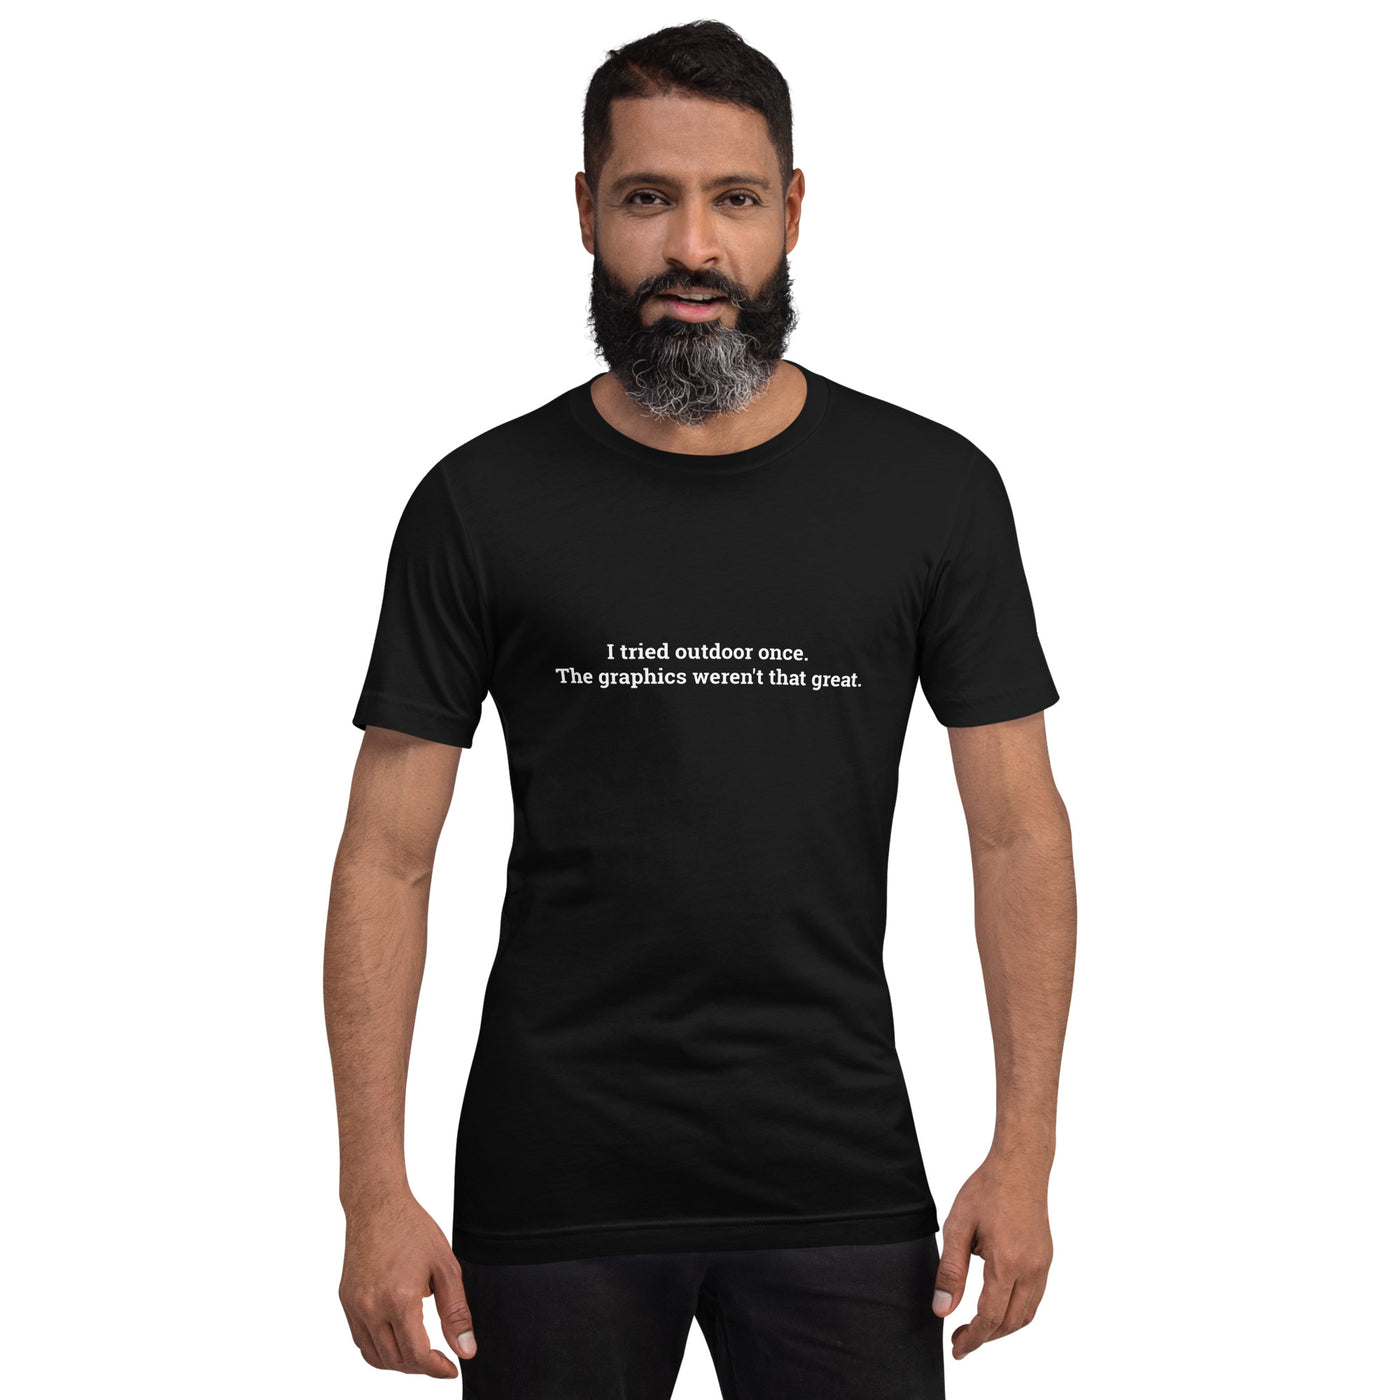 I Tried outdoor once, but the Graphics Weren't that good - Unisex t-shirt